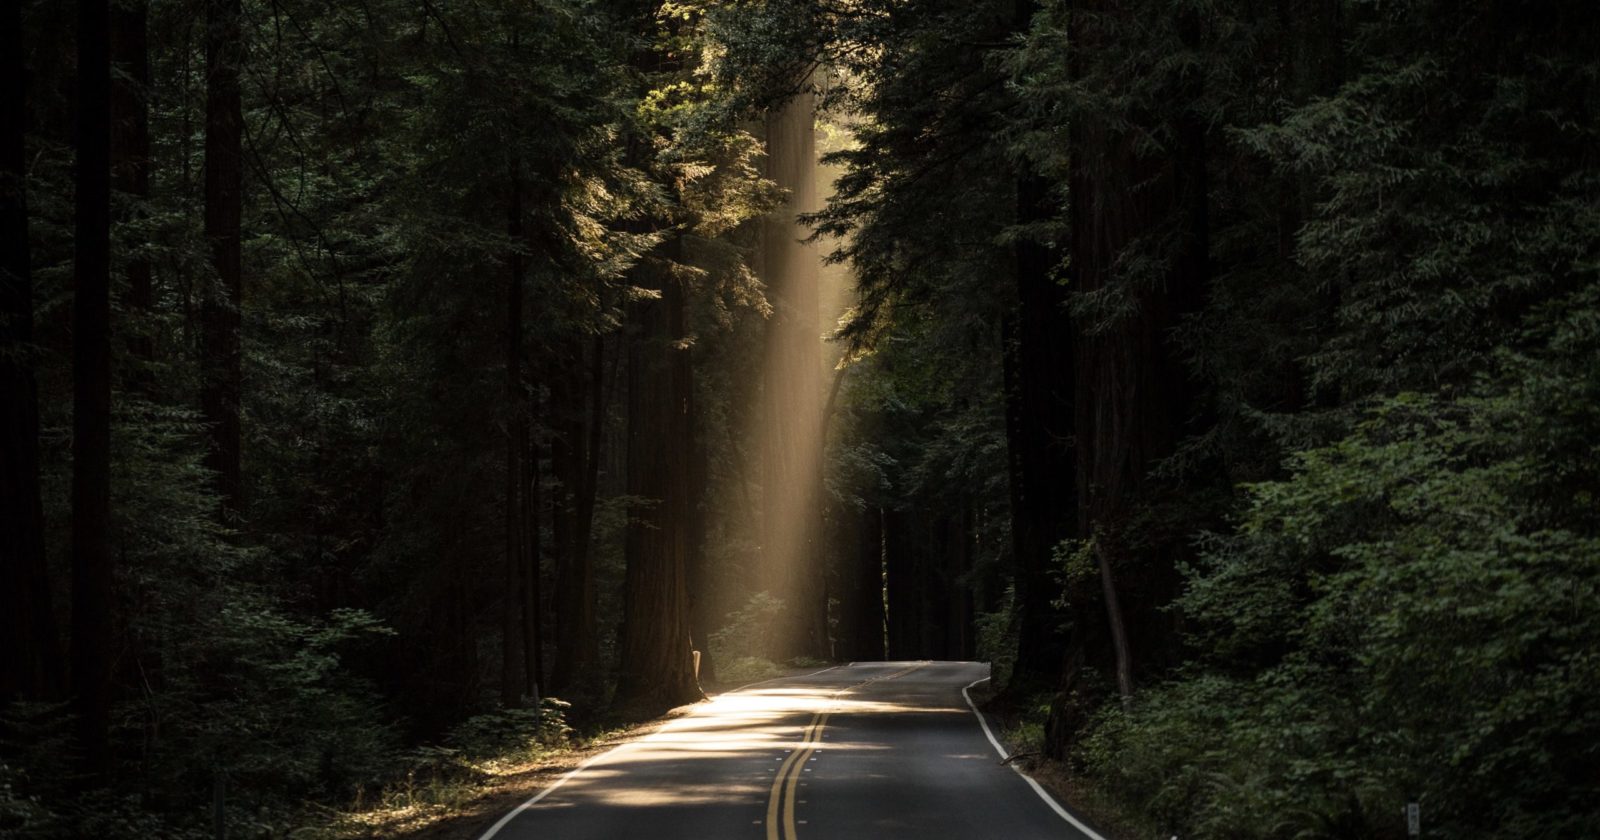 Light shines on a road